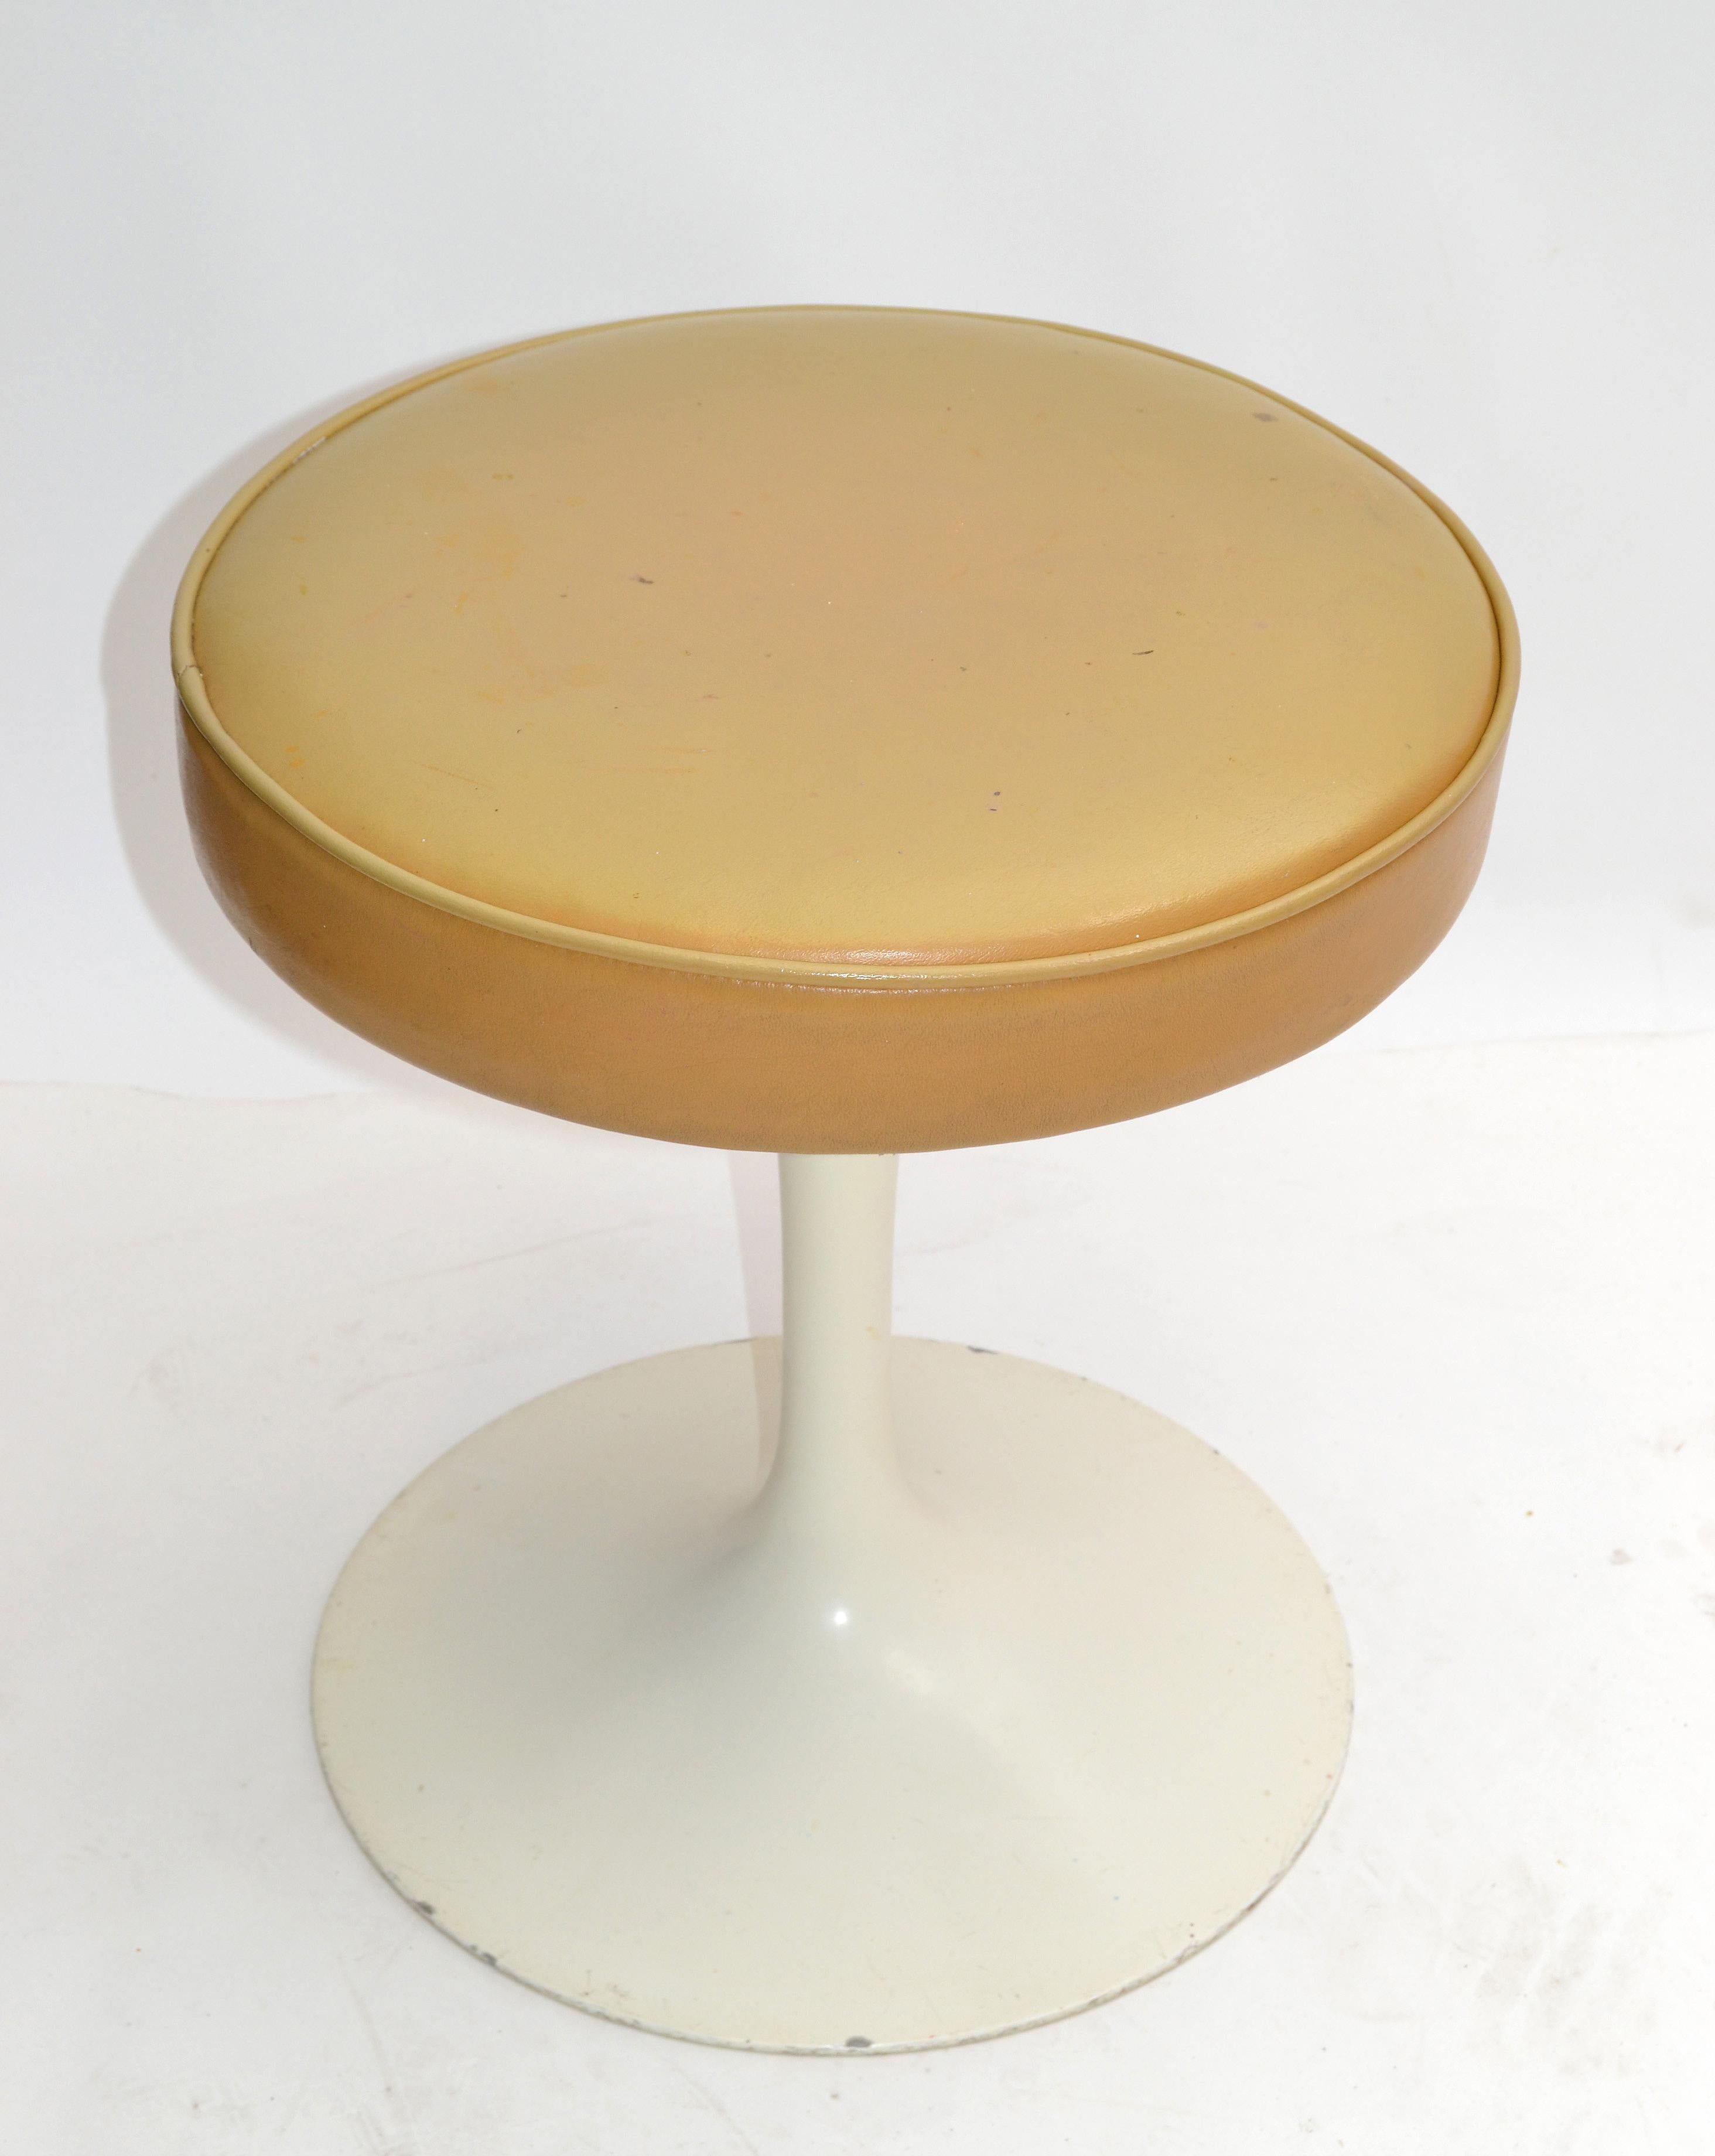 Mid-Century Modern early Knoll Associates Tulip Eero Saarinen stool designed in the 1950s.
Painted aluminum tulip stand in a cream finish and upholstered in original dark Mustard color leather.
The base is numbered BR 51 otherwise no markings.